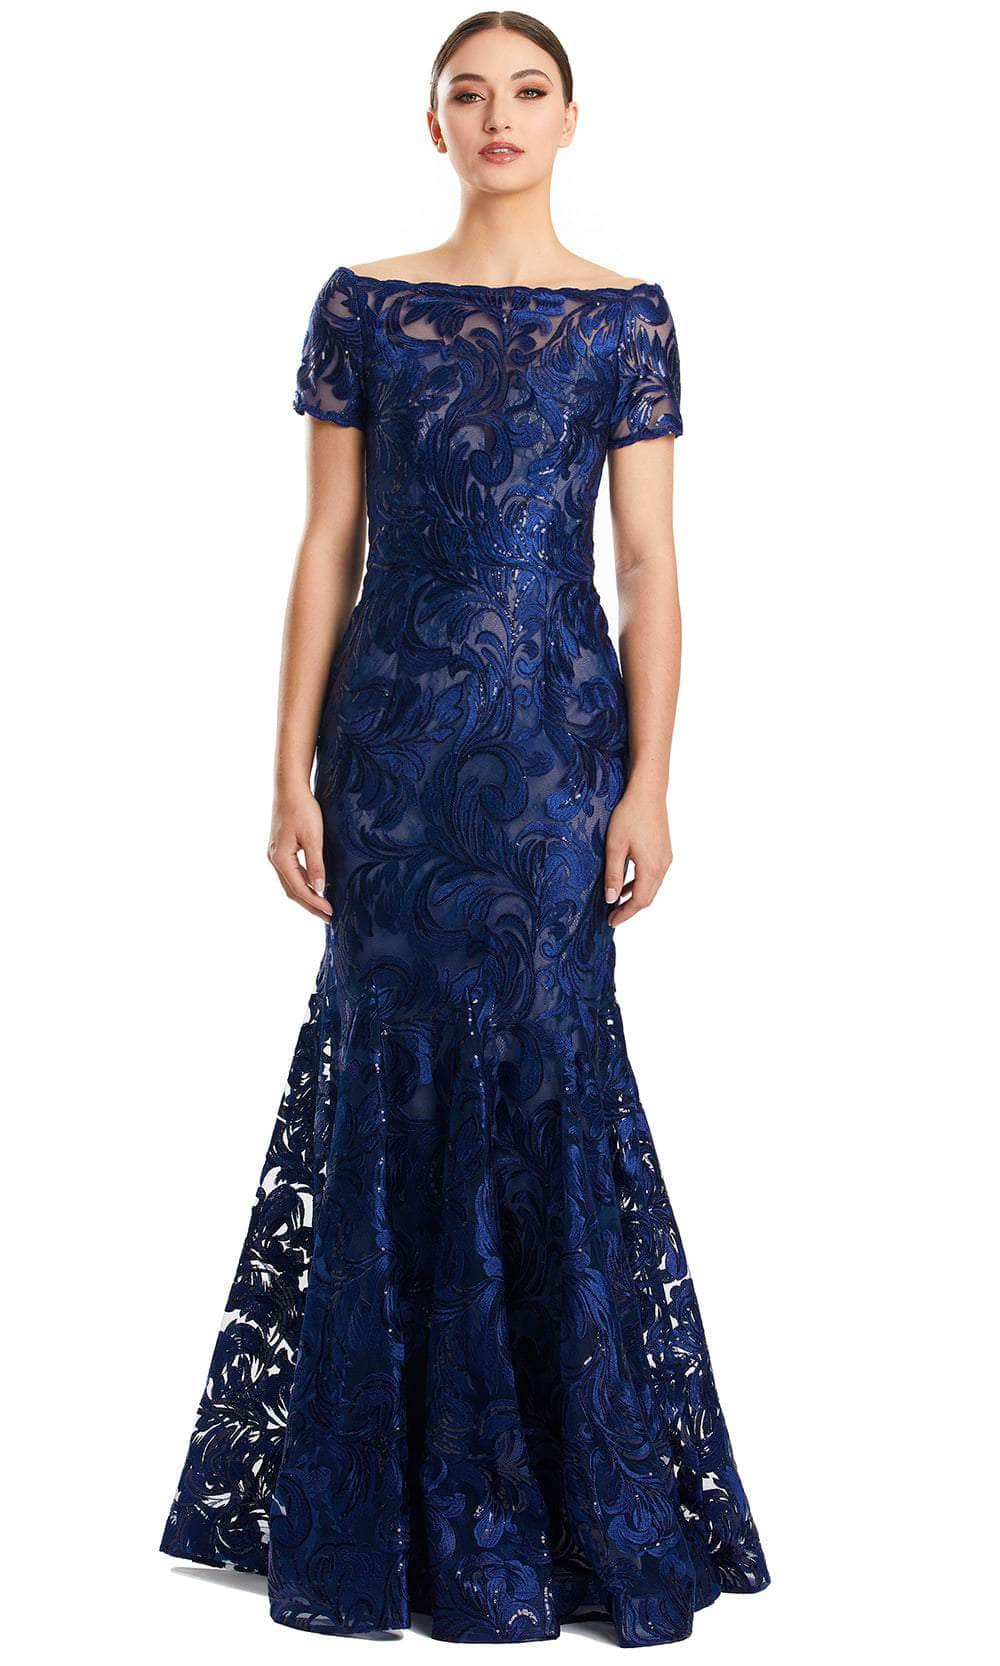 Image of Alexander by Daymor 1859F23 - Short Sleeve Lace Applique Long Dress